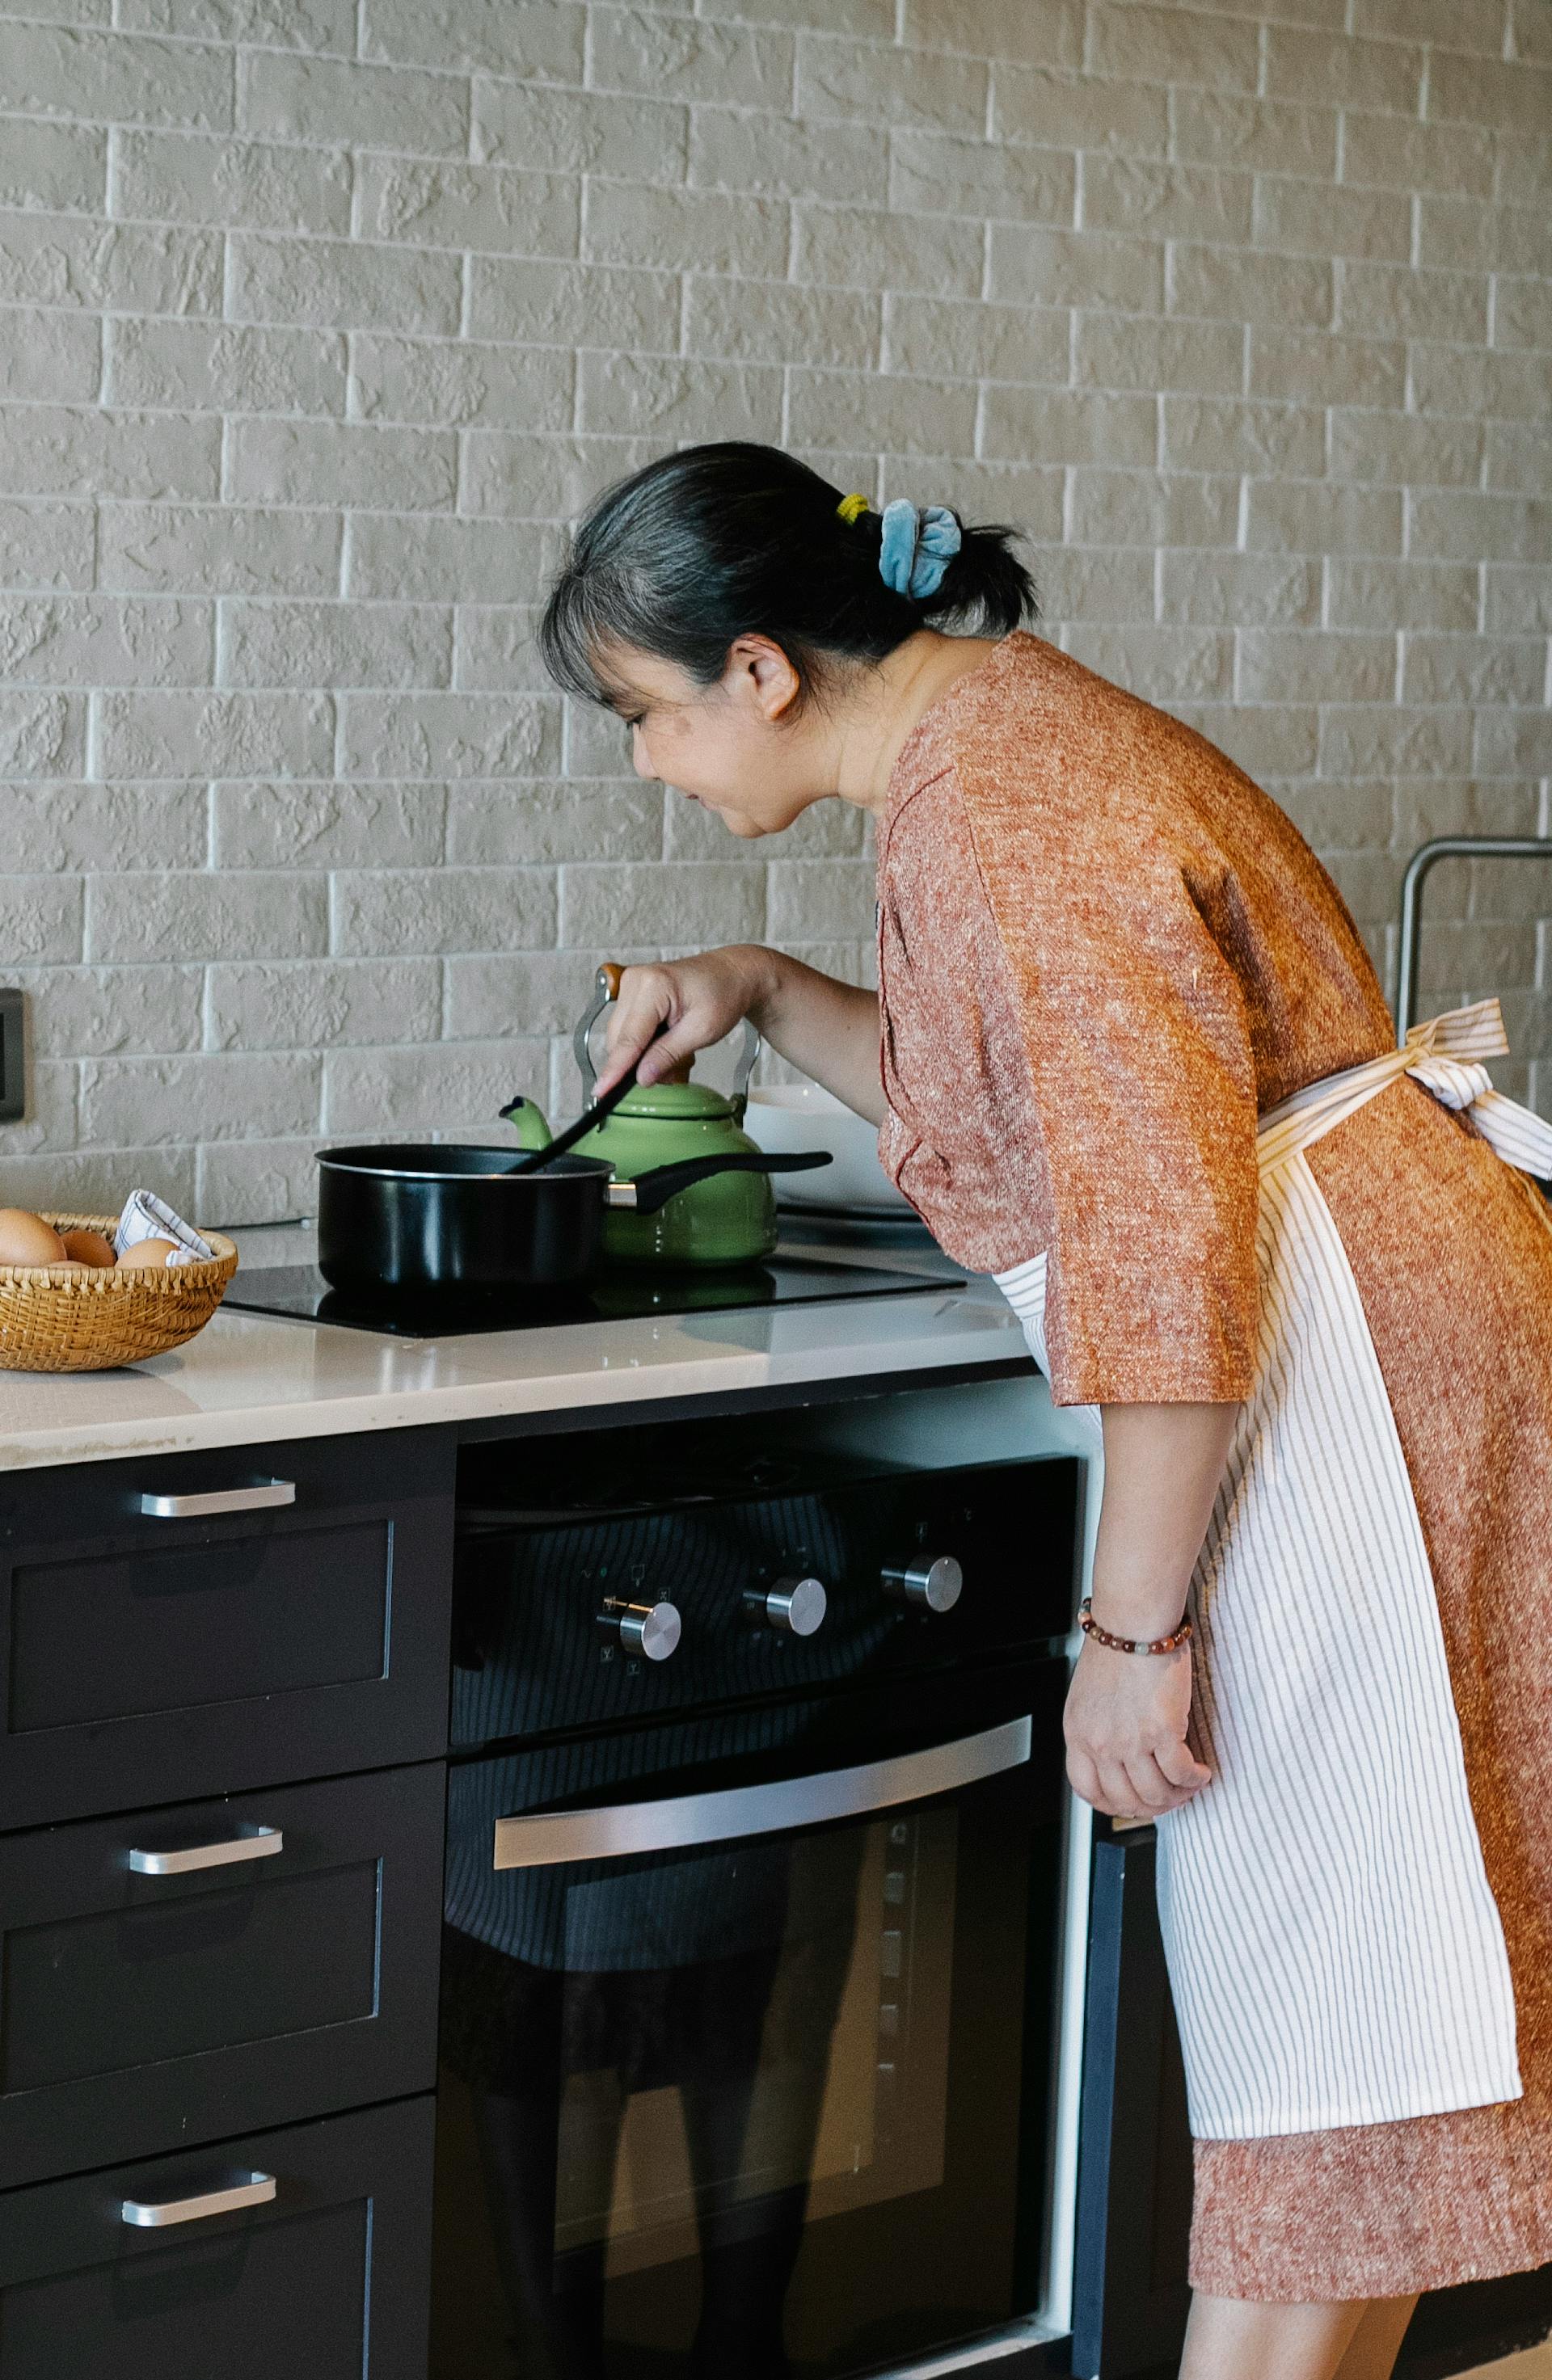 A senior woman stirring a pot in the kitchen | Source: Pexels